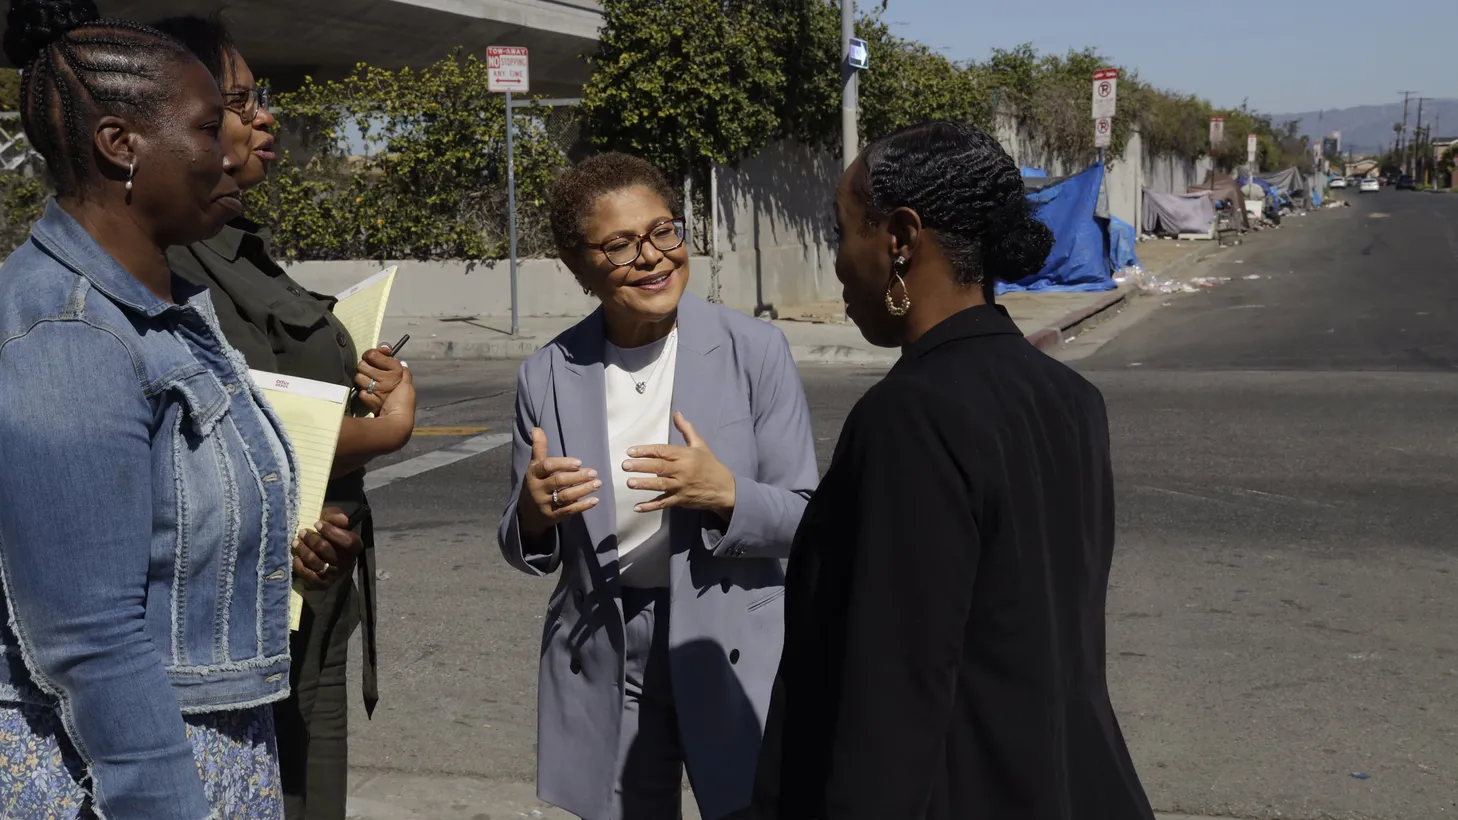 Congresswoman Karen Bass appears to be the front runner of the Los Angeles mayoral race. The LA native’s experience in Washington D.C. may serve her well in the upcoming election, according to commentator Joe Matthews.